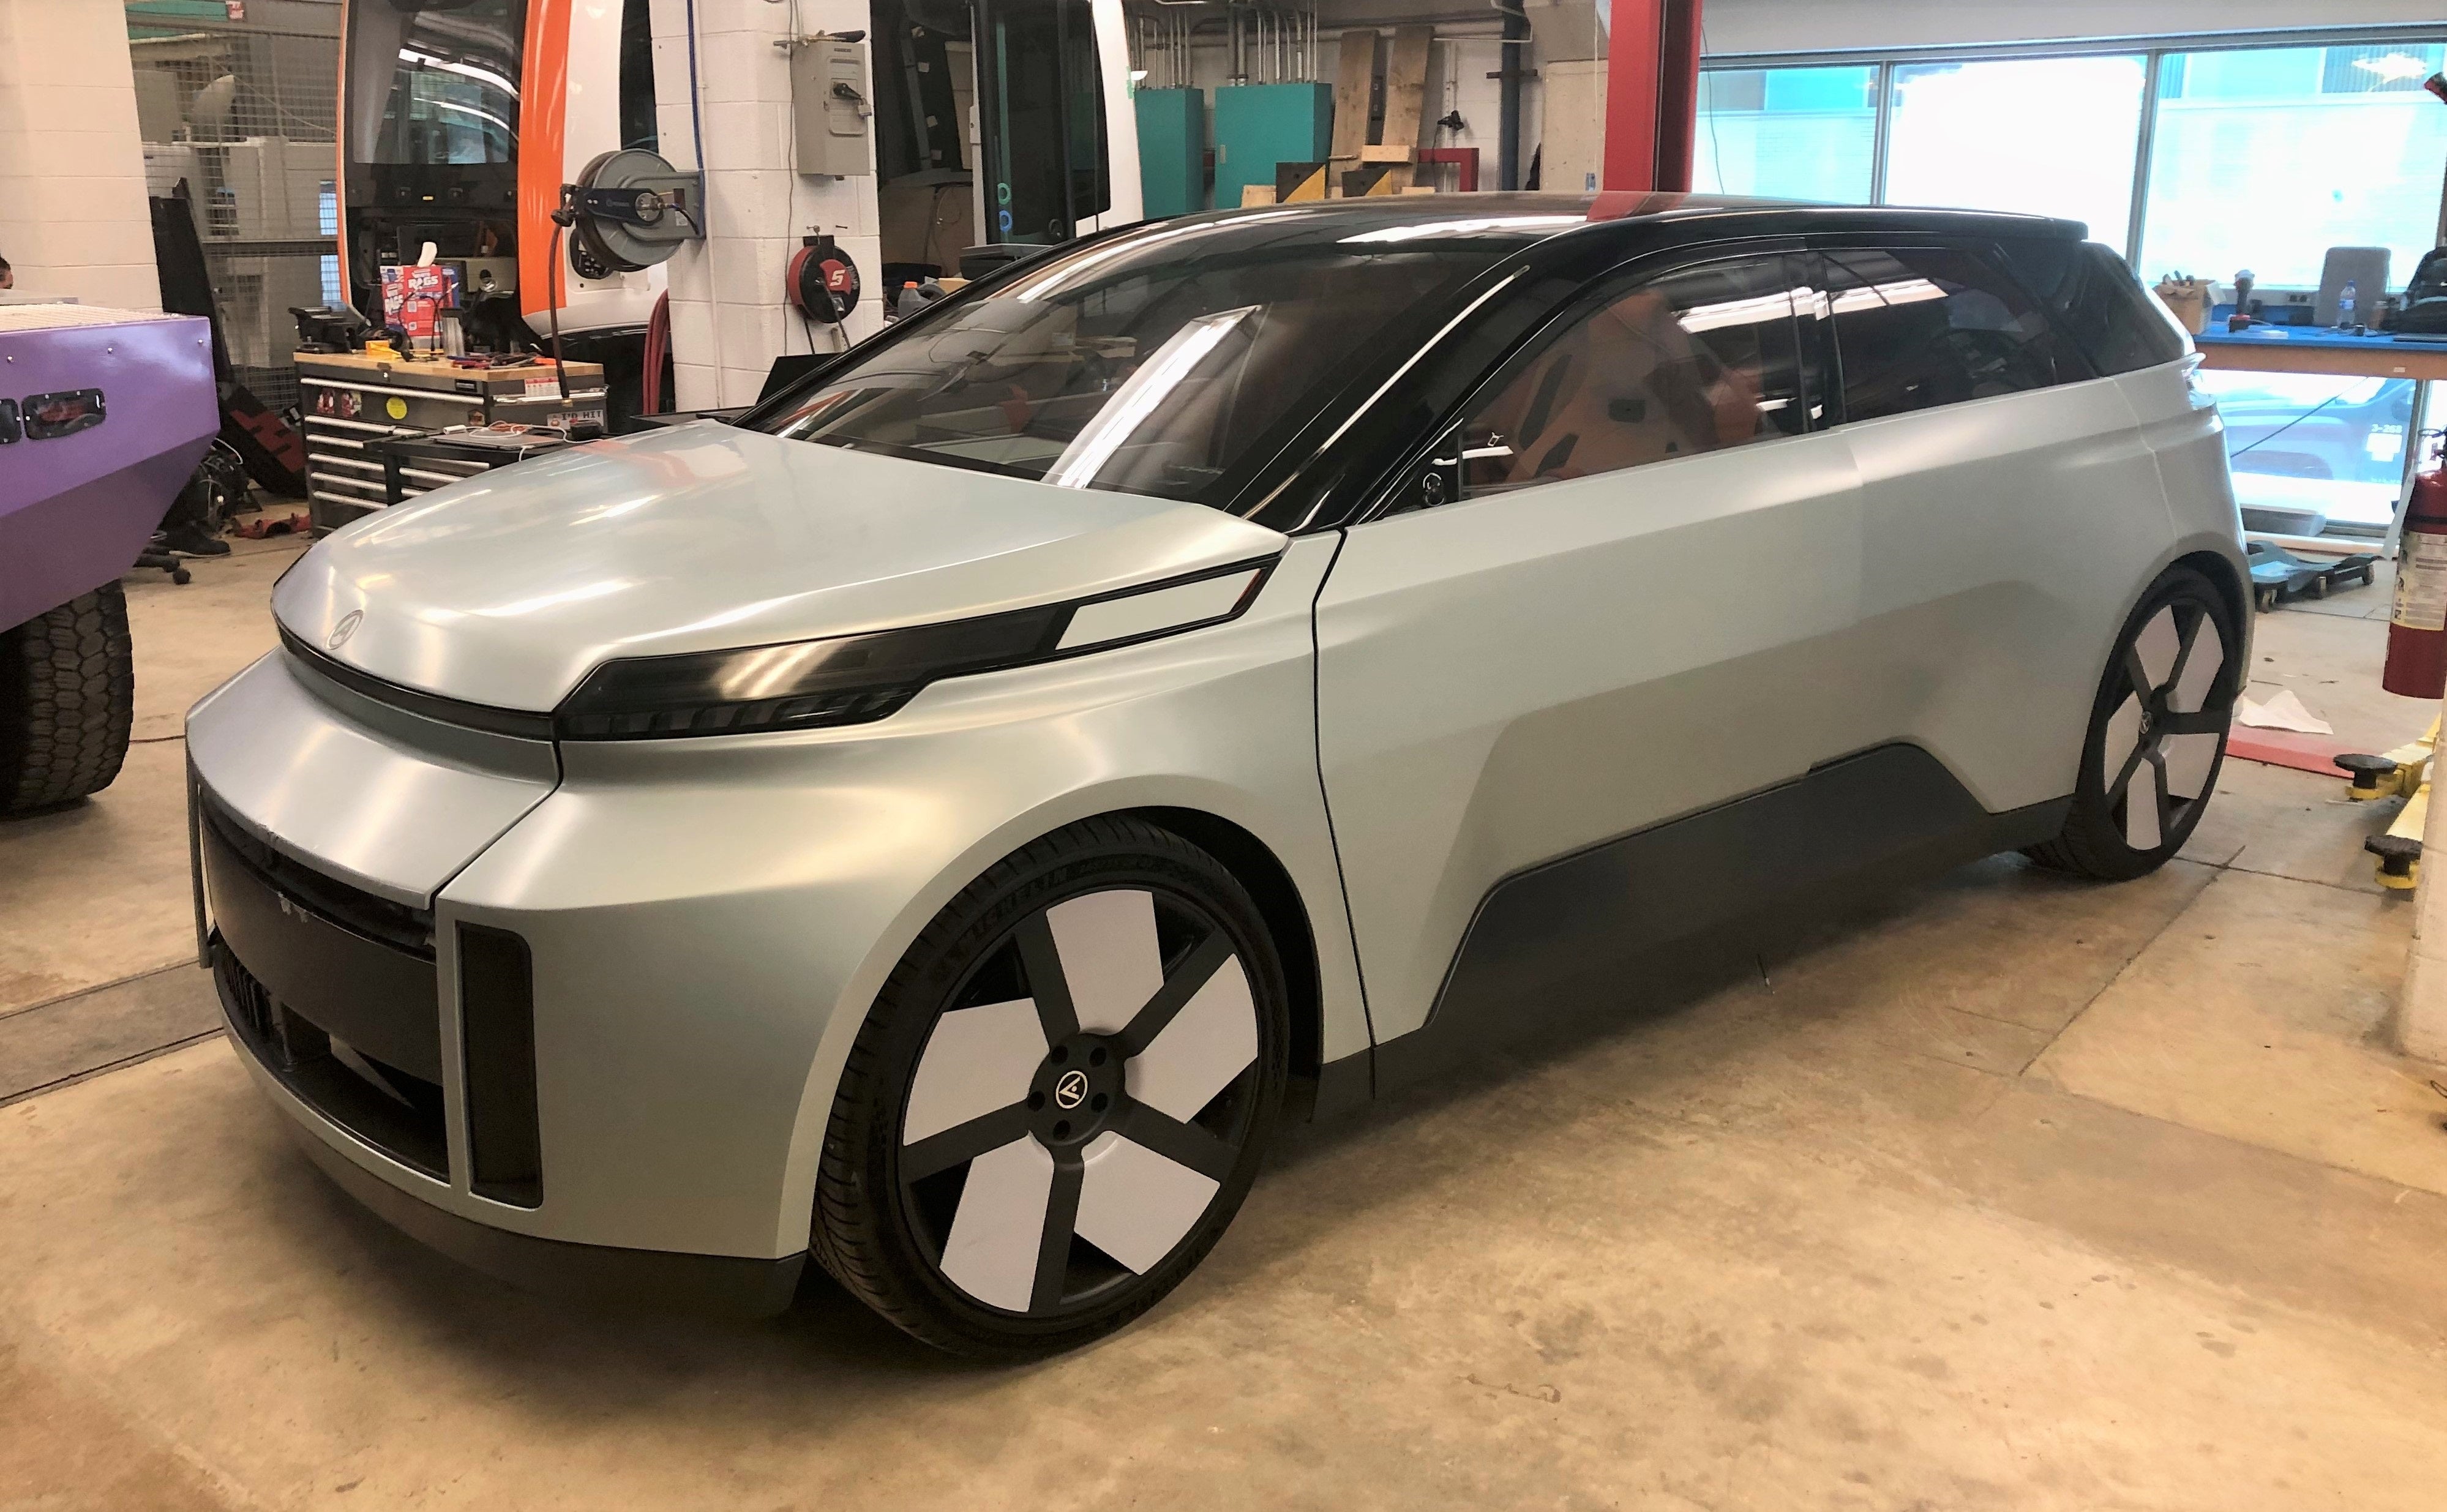 A front view of the Arrow concept car.